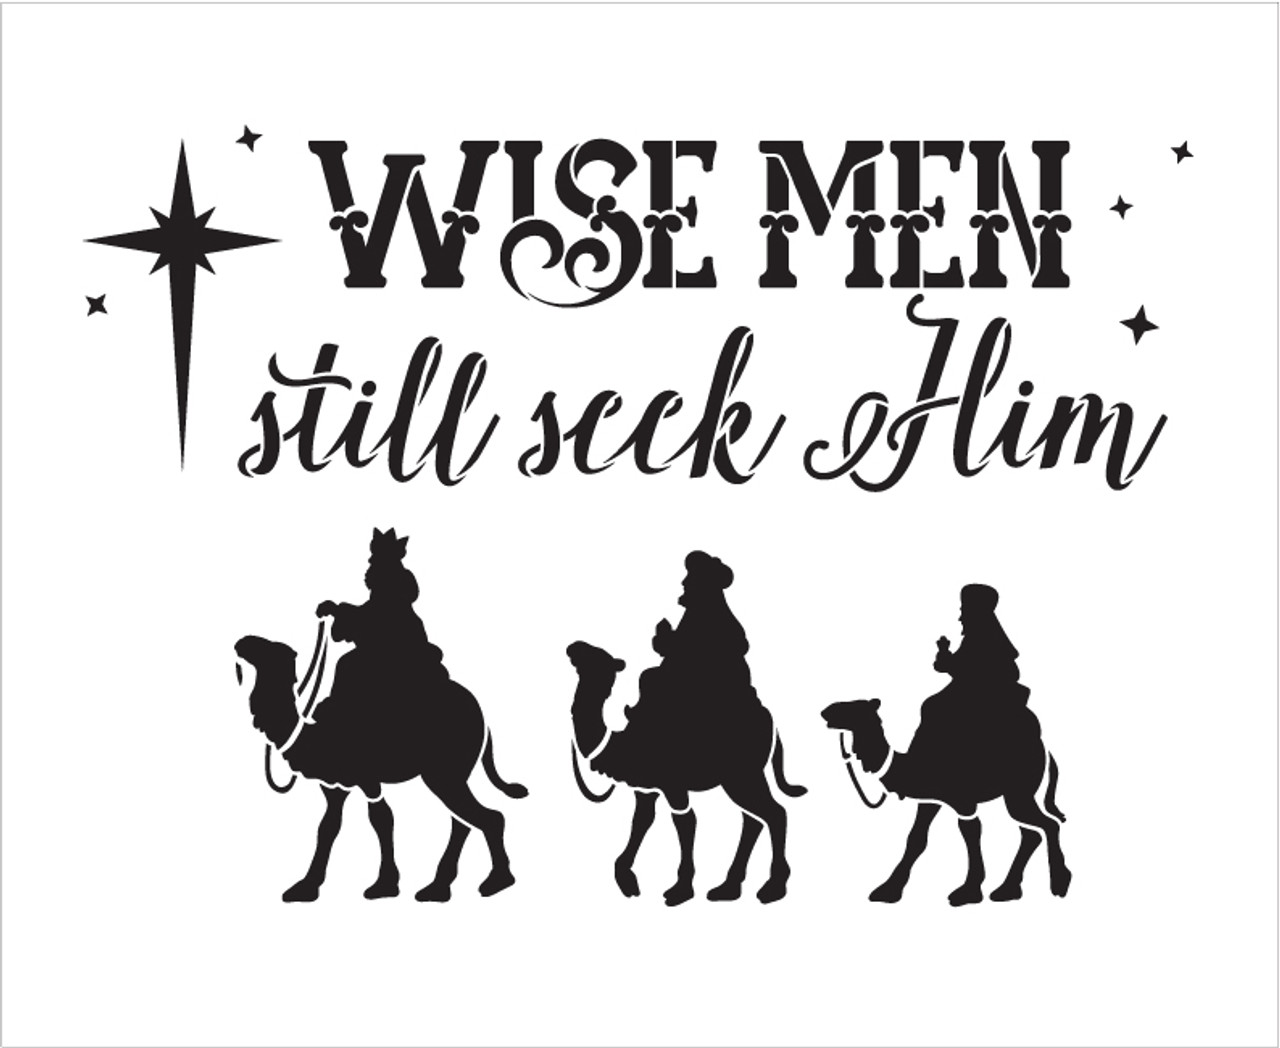 Wise Men Still Seek Him - Rectangle with Camels - Word Art Stencil - 17" x 13" - STCL1542_3 - by StudioR12